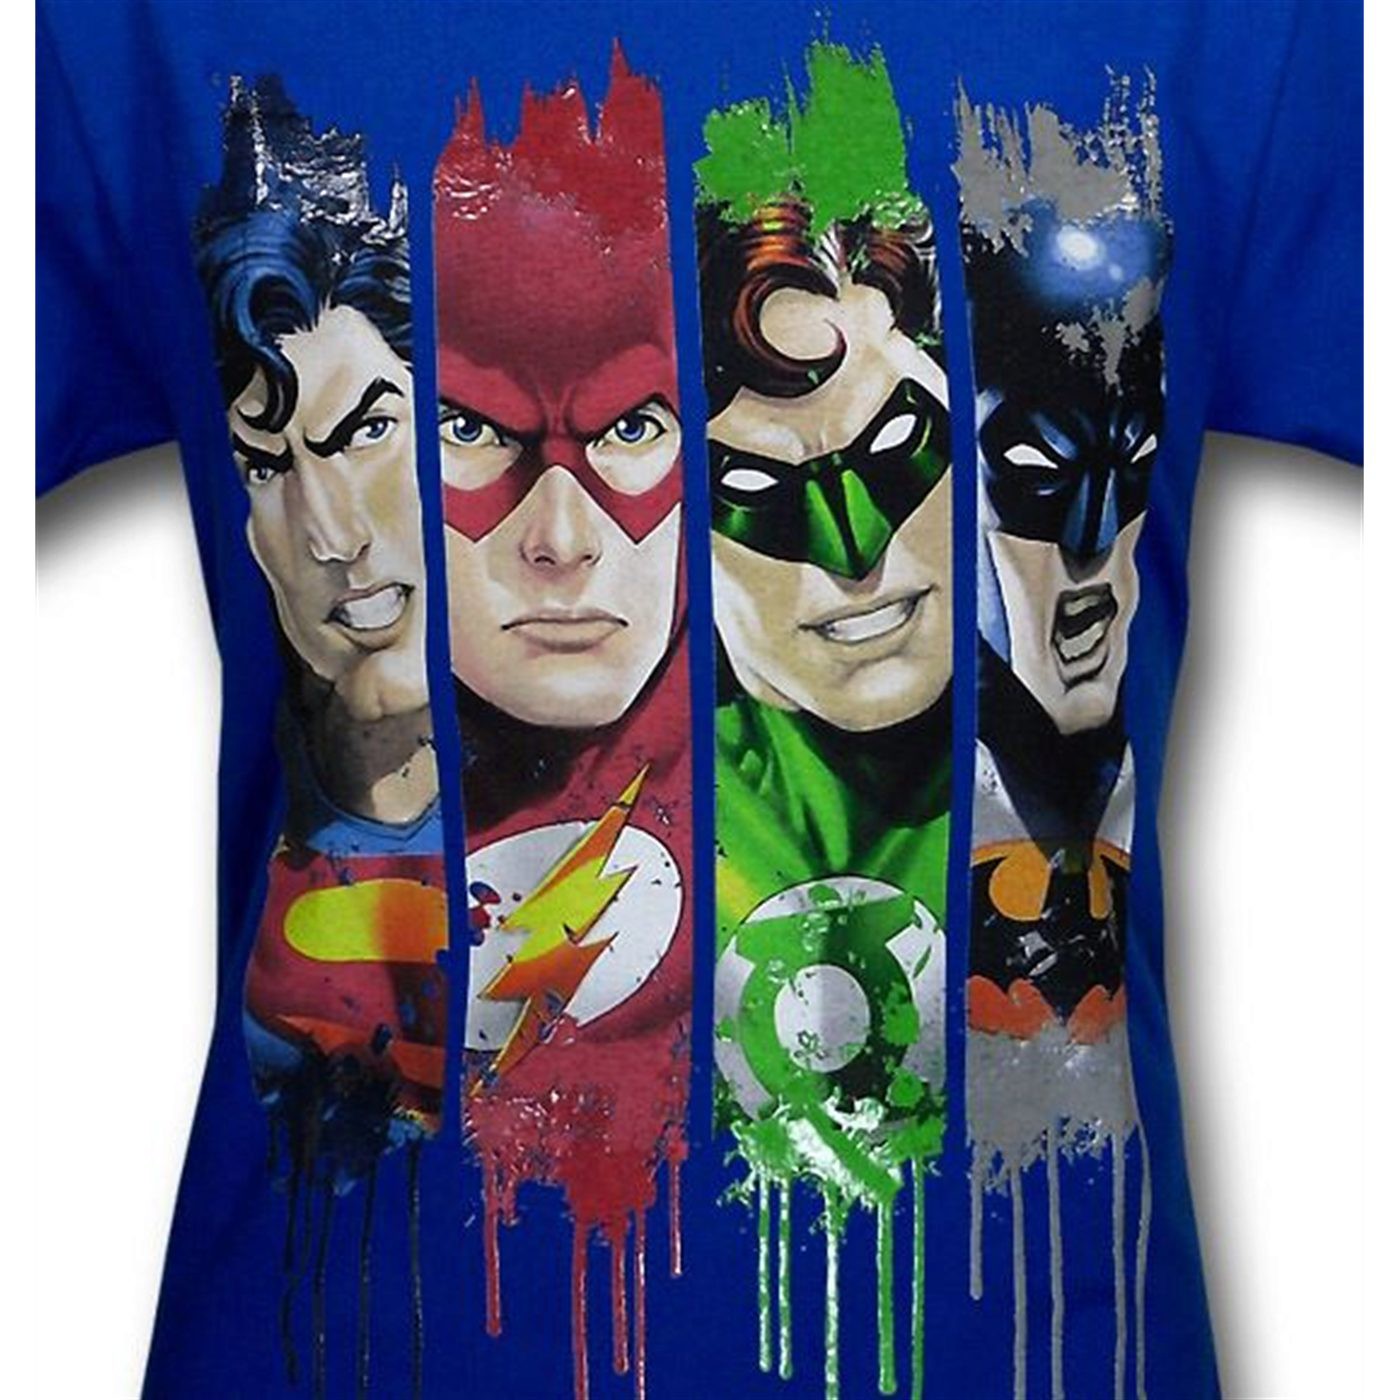 Justice League Drip Splatter Youth T-Shirt